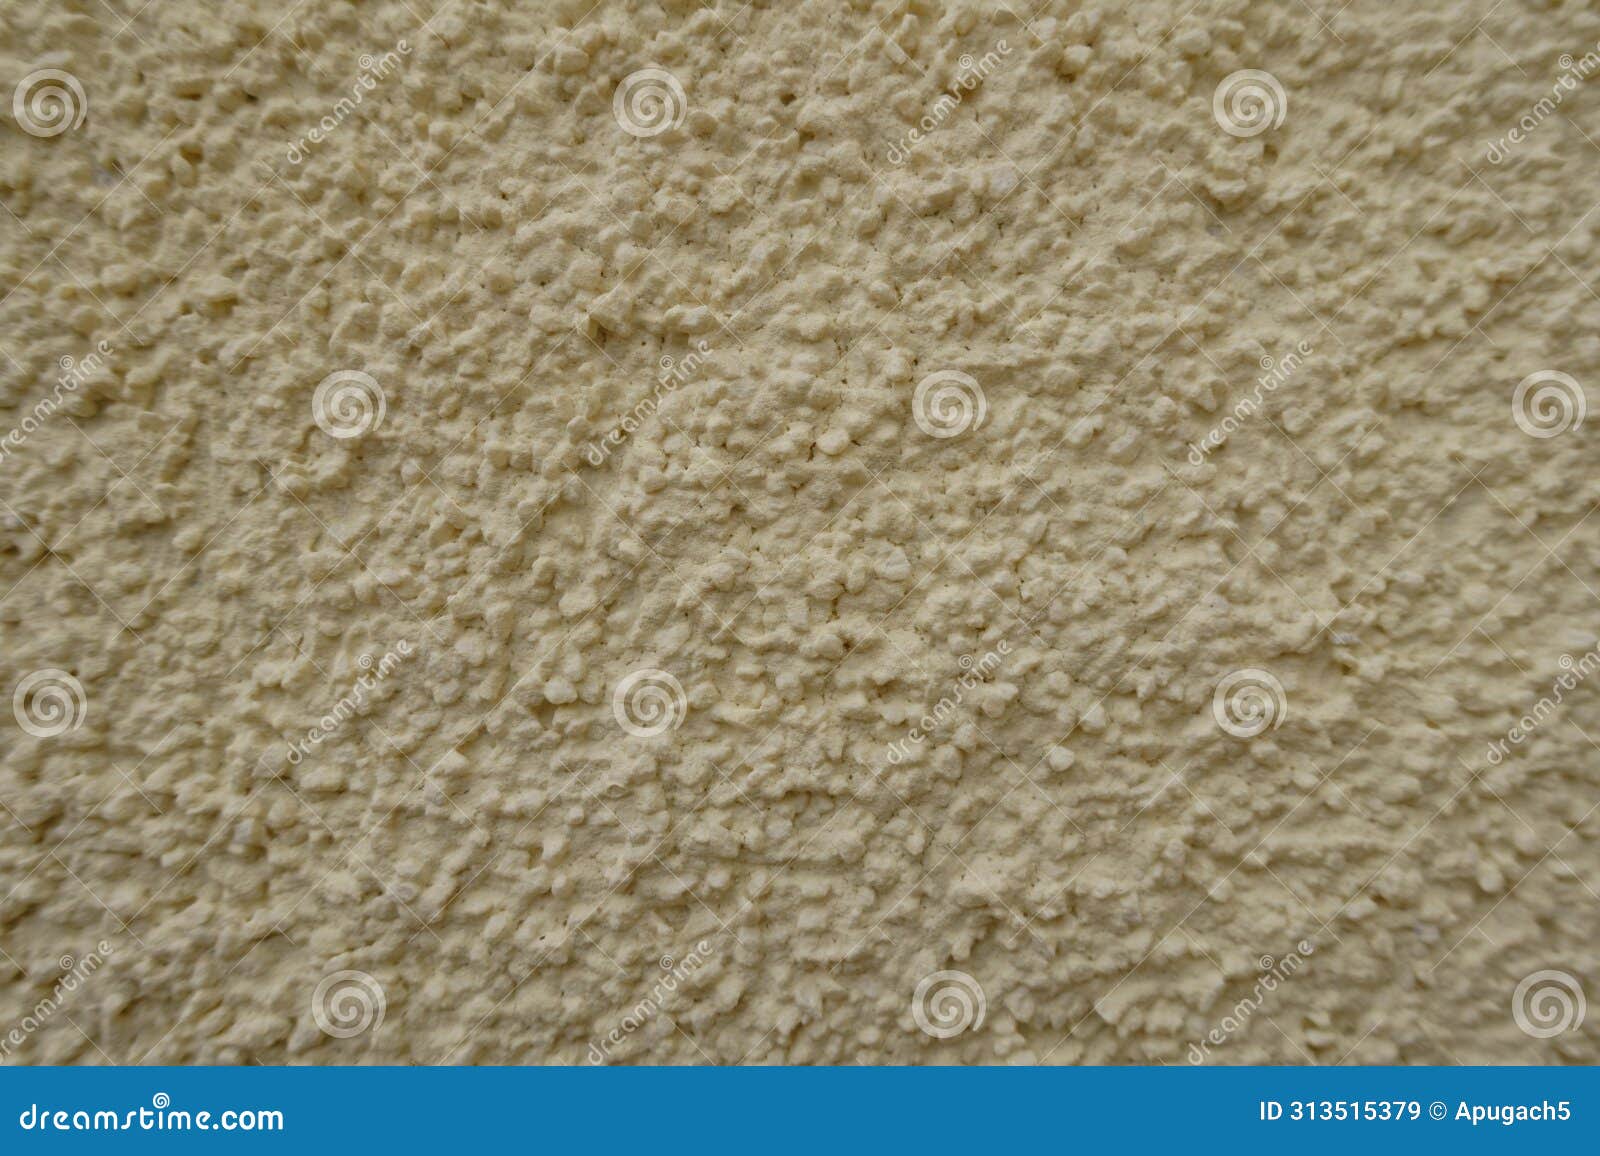 macro of wall with light beige roughcast finish